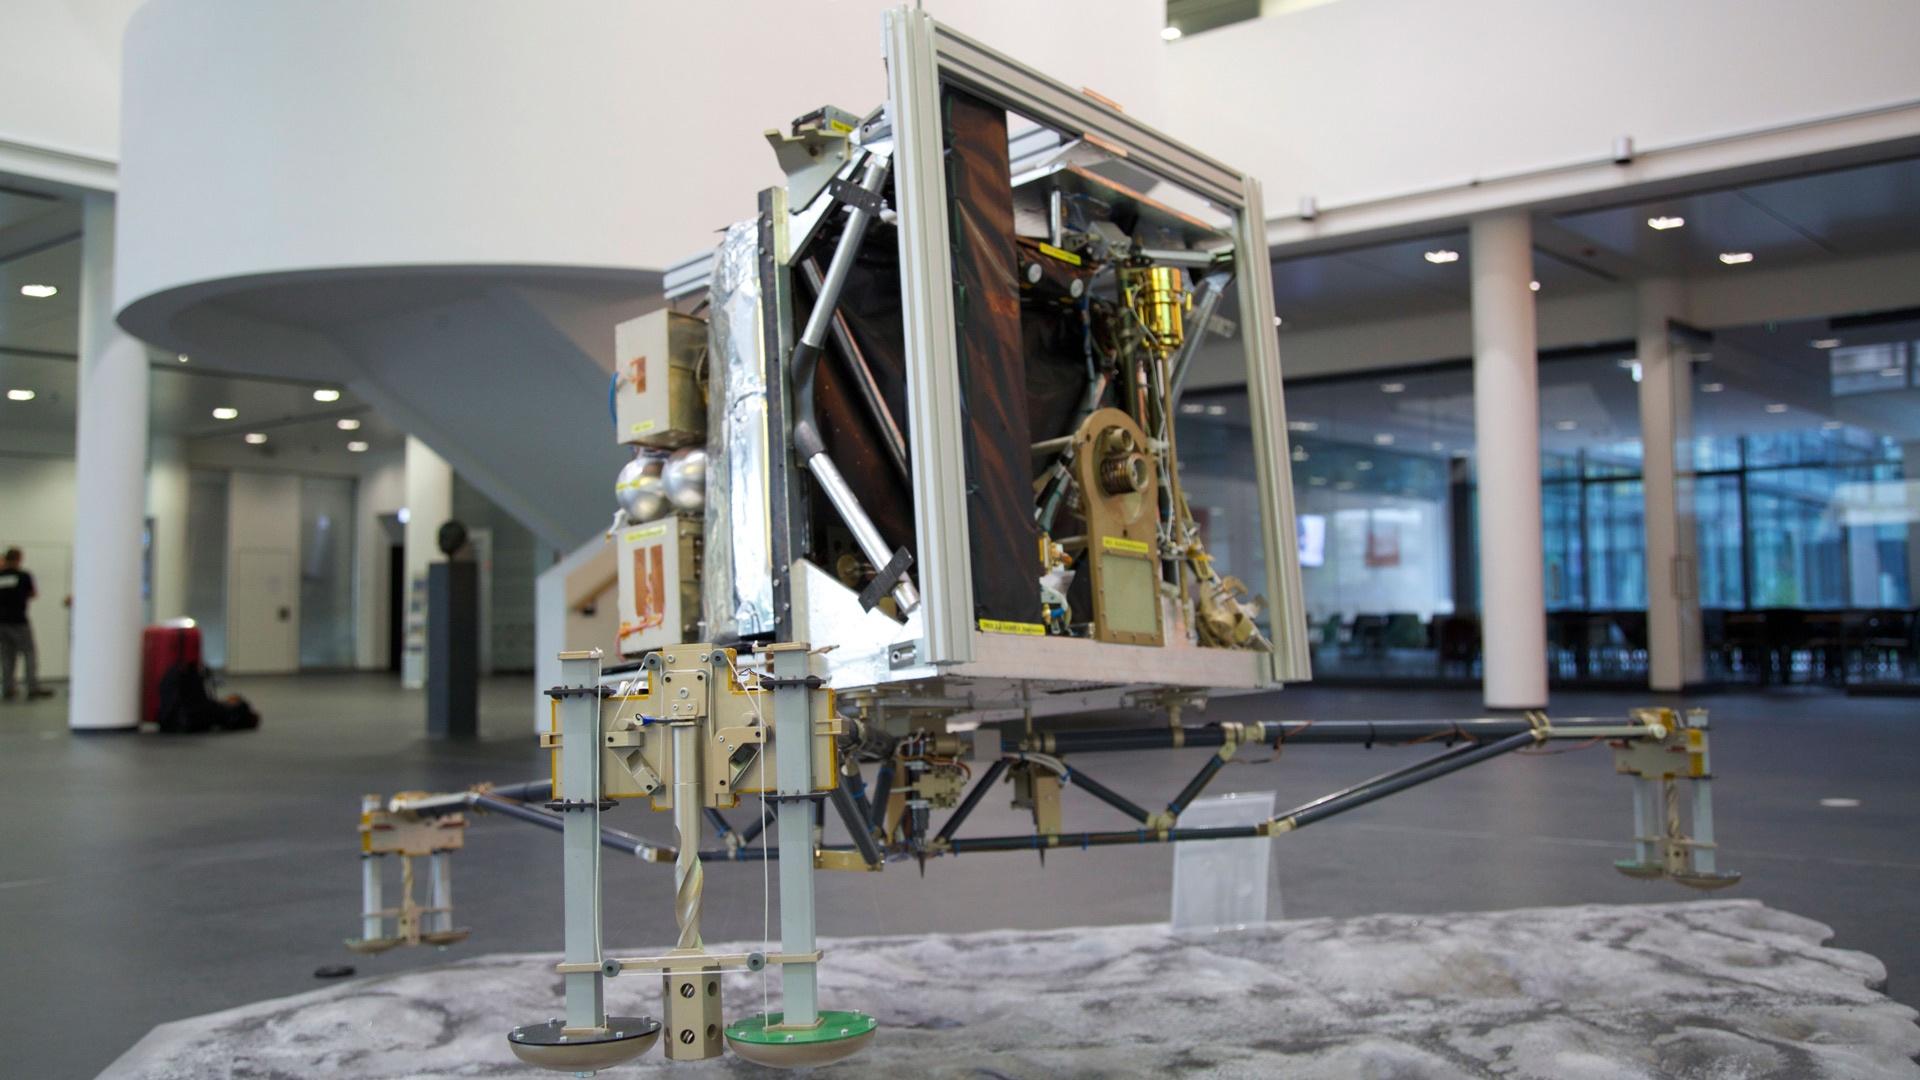 A Philae lander replica at the Max Planck Institue of Solar System Research in Gottingen, Germany